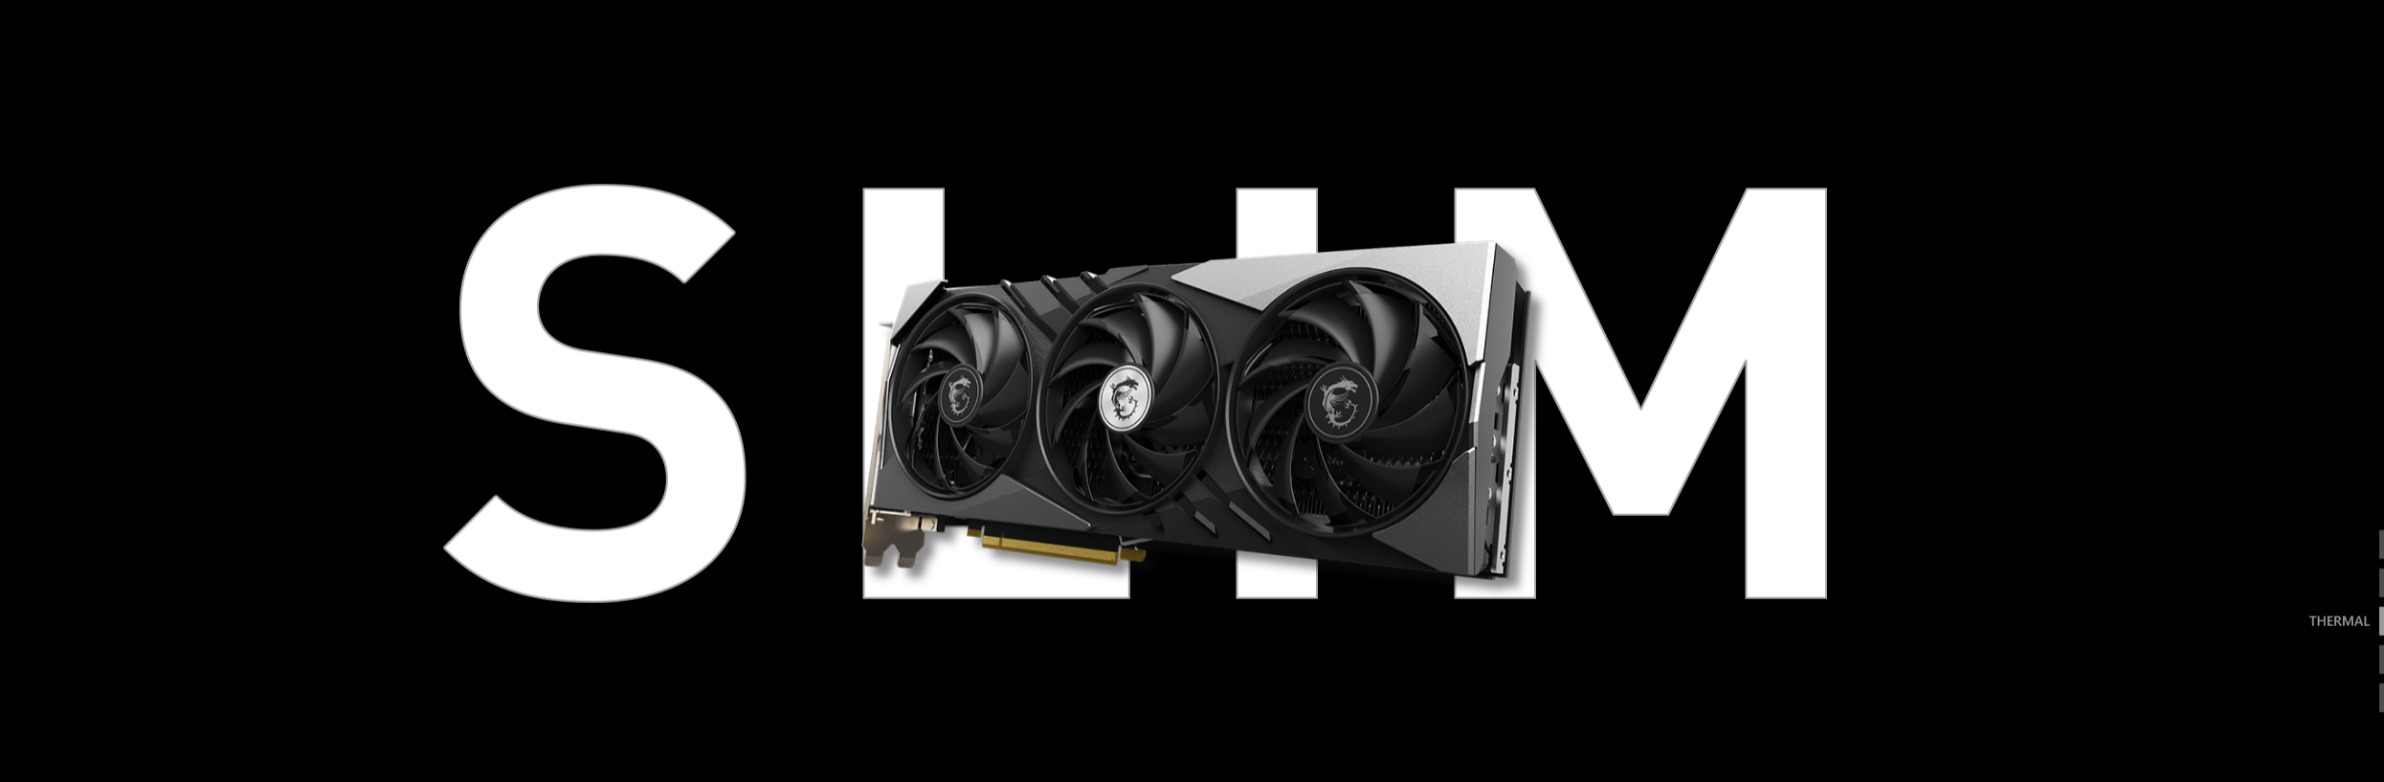 A large marketing image providing additional information about the product MSI GeForce RTX 4070 Gaming X Slim 12GB GDDR6 - Black - Additional alt info not provided